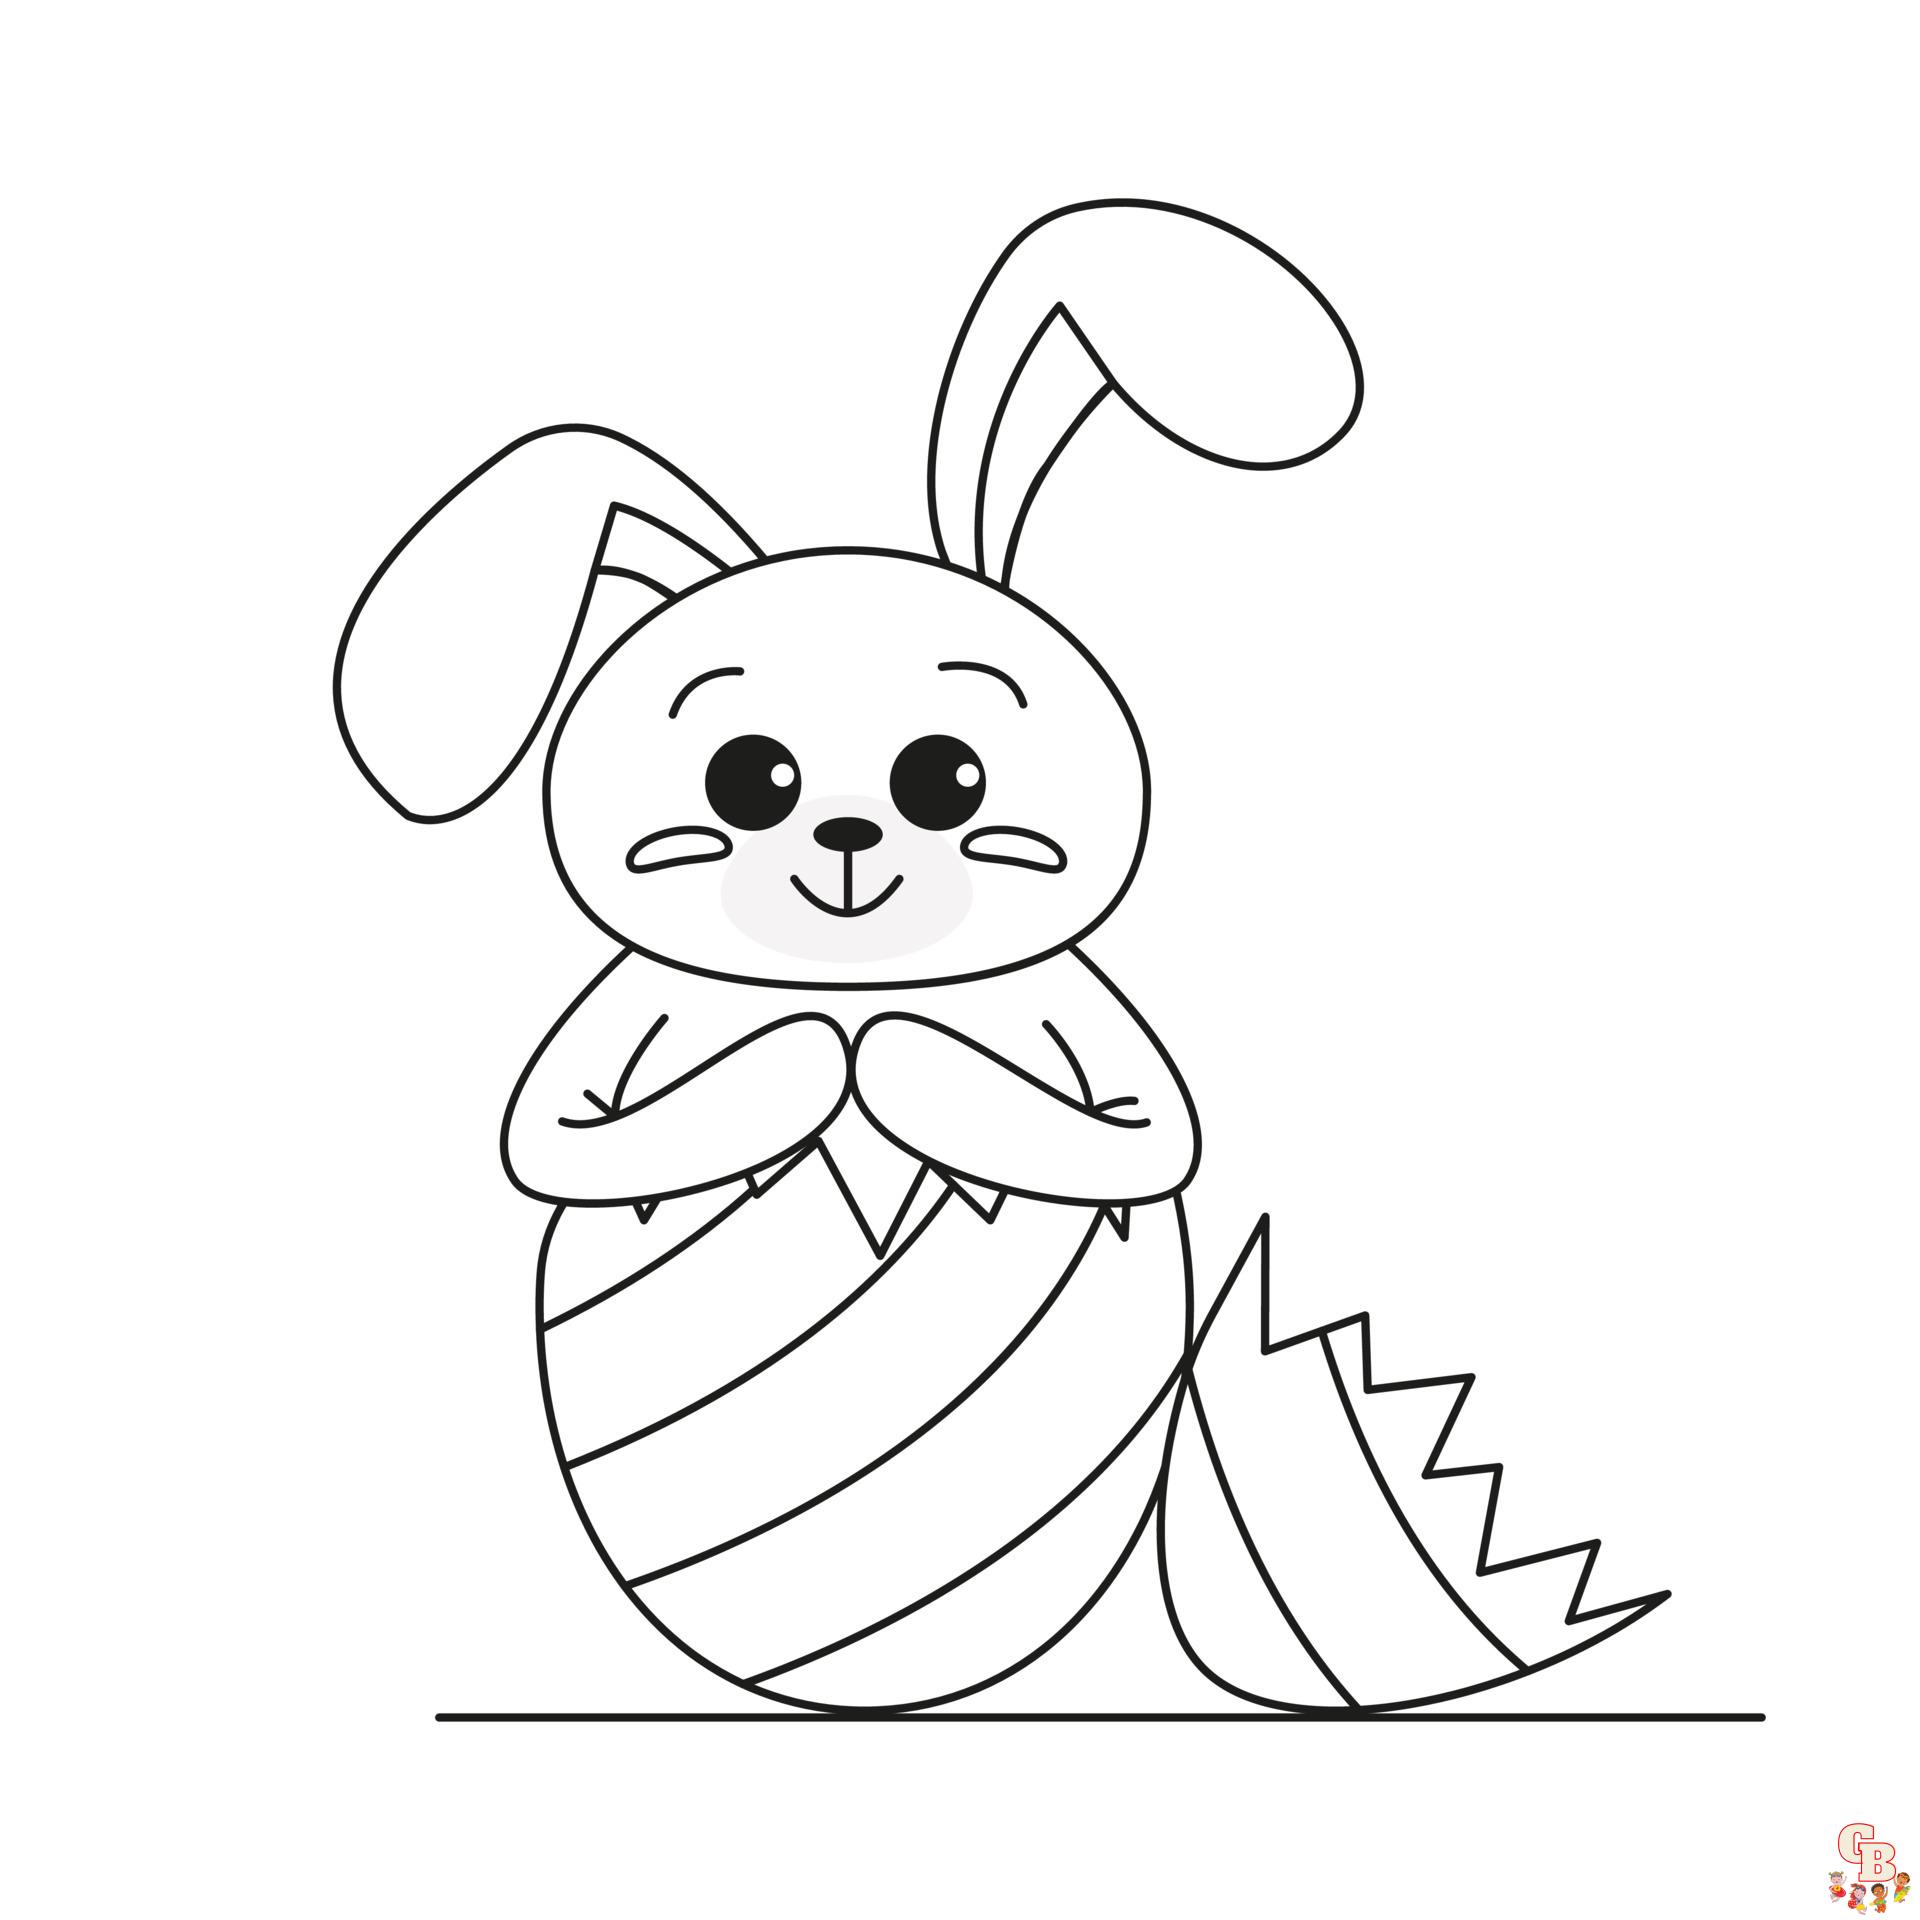 Coloring Rabbit Cartoon, Easter, realistic, jumping, cute, with flowers